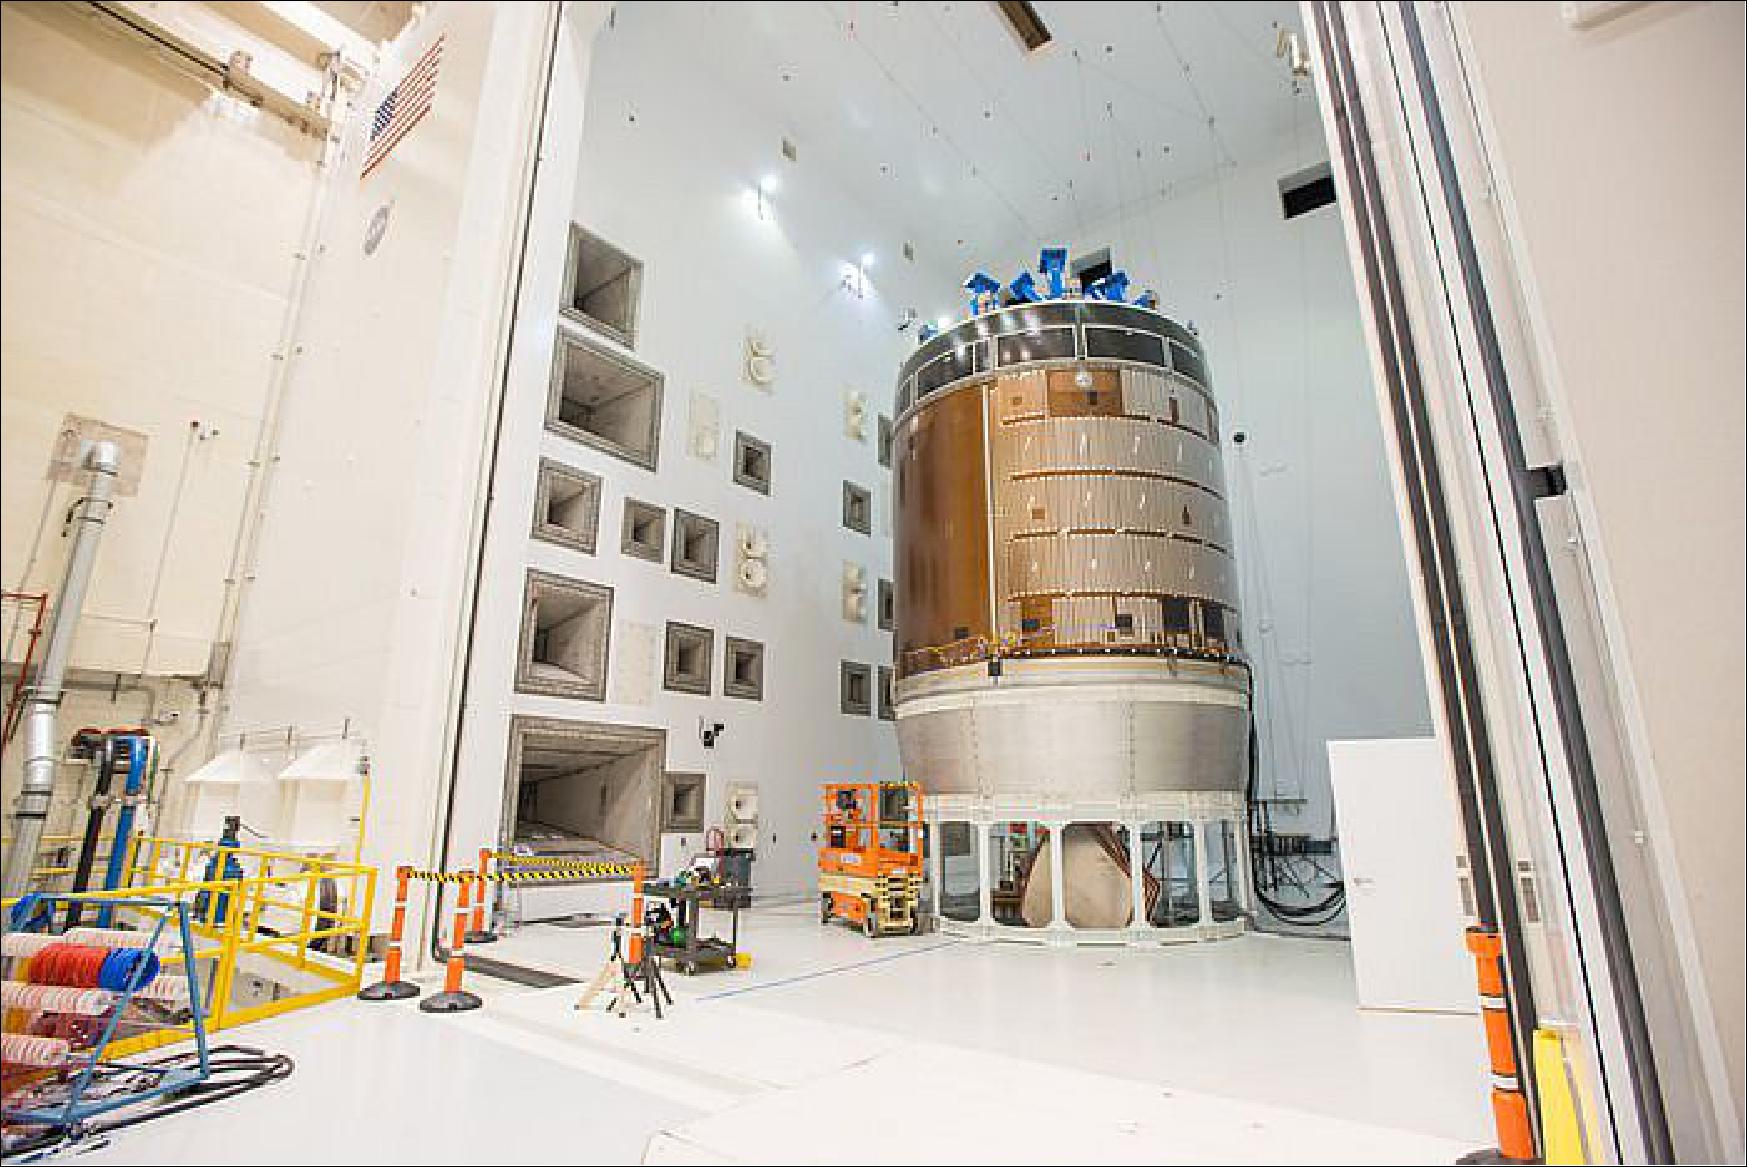 Figure 75: Photo of the European Structural Test Article which undergoes testing in NASA's acoustic test facility in Plum Brook, Ohio, USA (image credit: NASA)